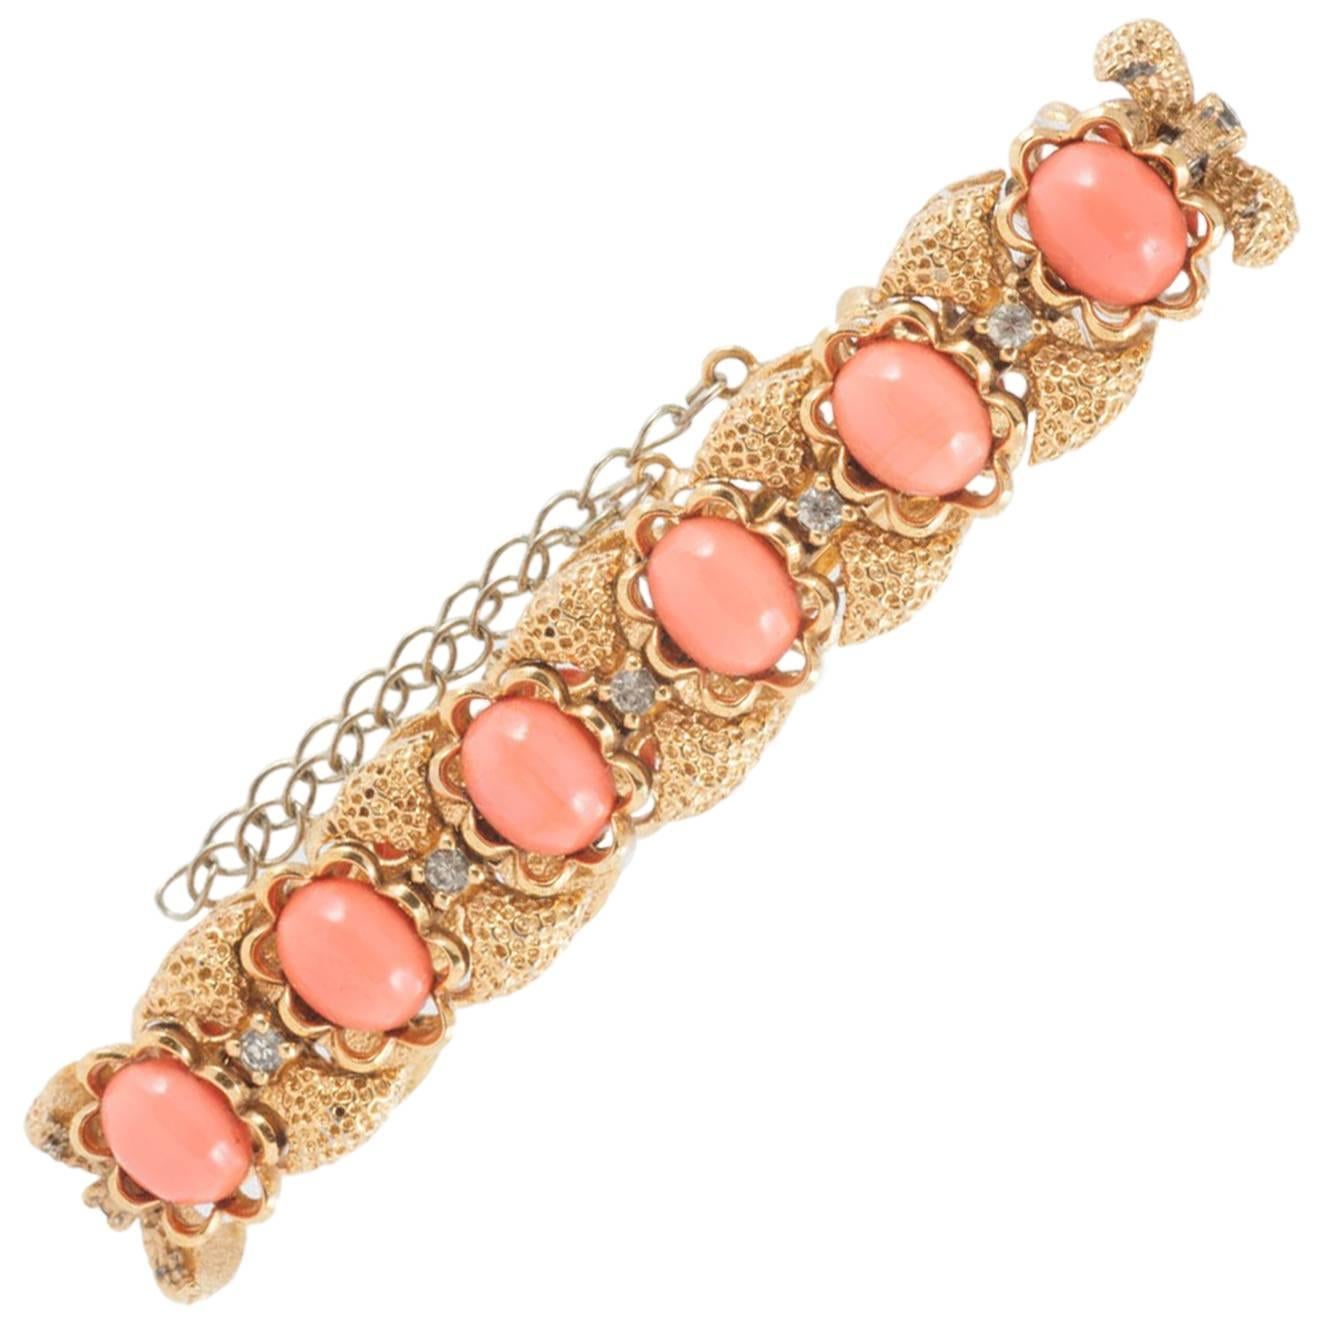 A rusticated gilt metal and faux coral bracelet, Panetta, 1960s. 